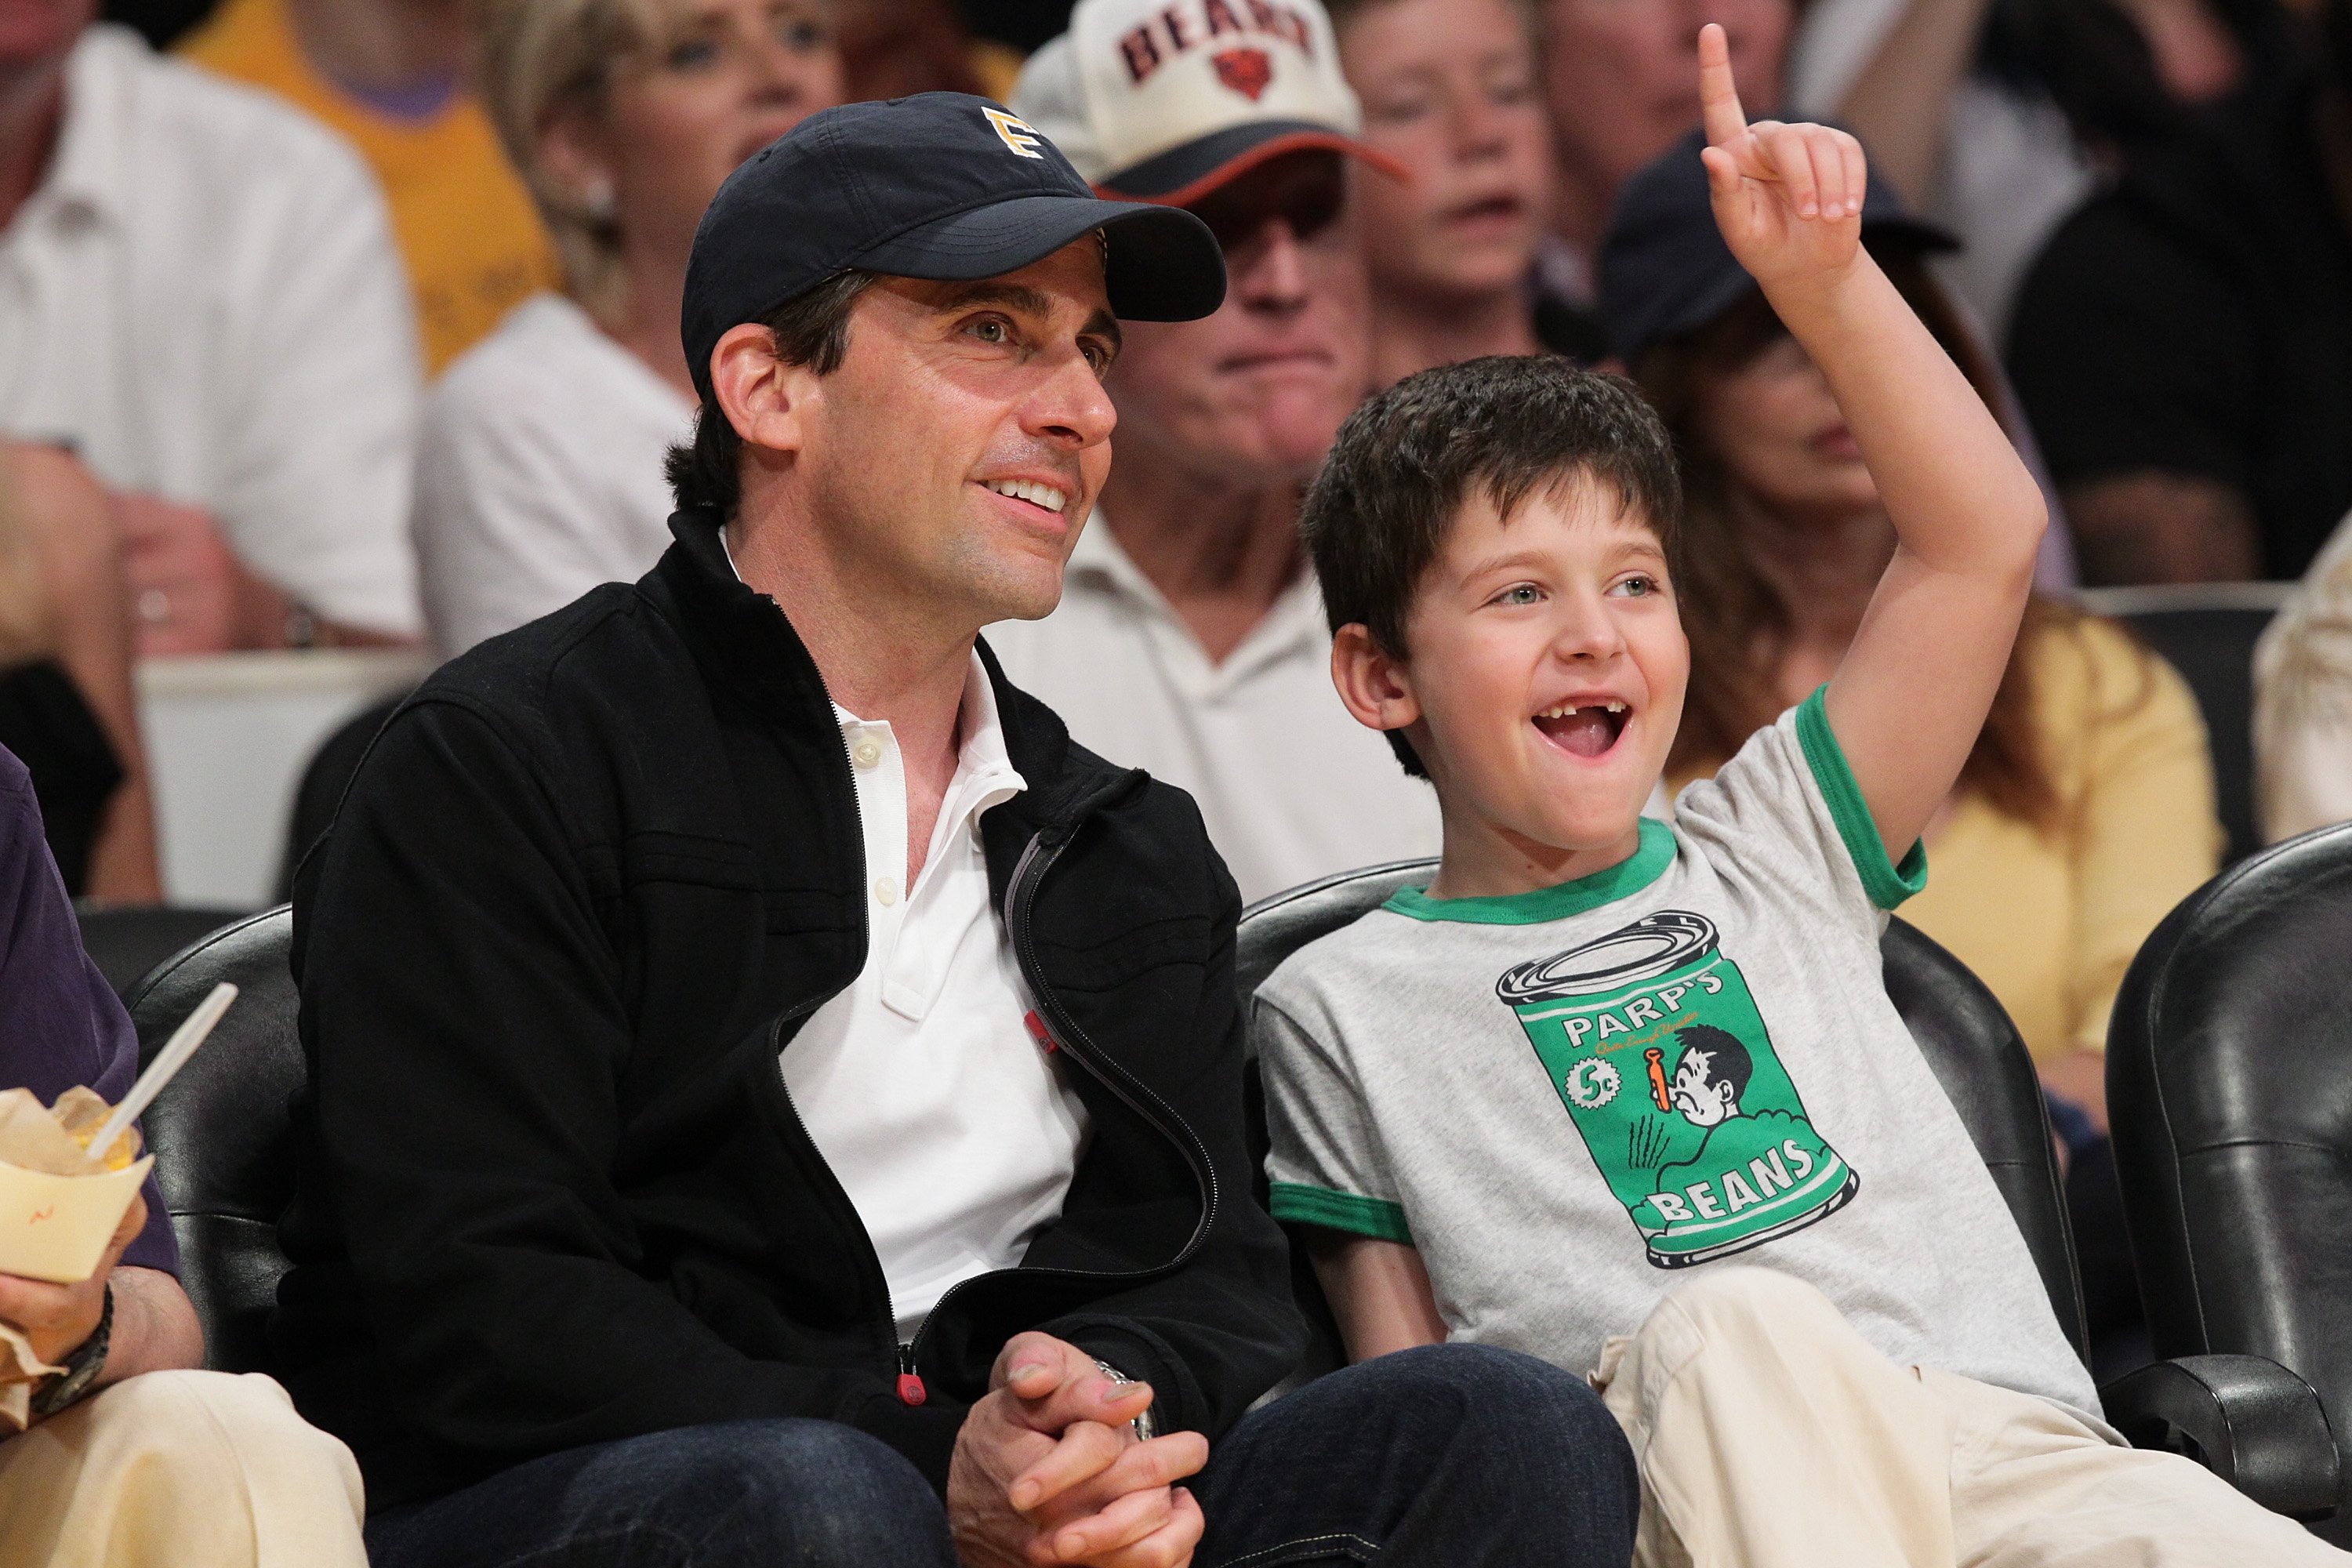 Steve and John Carell watching the New Orleans Hornets vs. the Los Angeles Lakers at the Staples Center on April 17, 2011 | Source: Getty Images